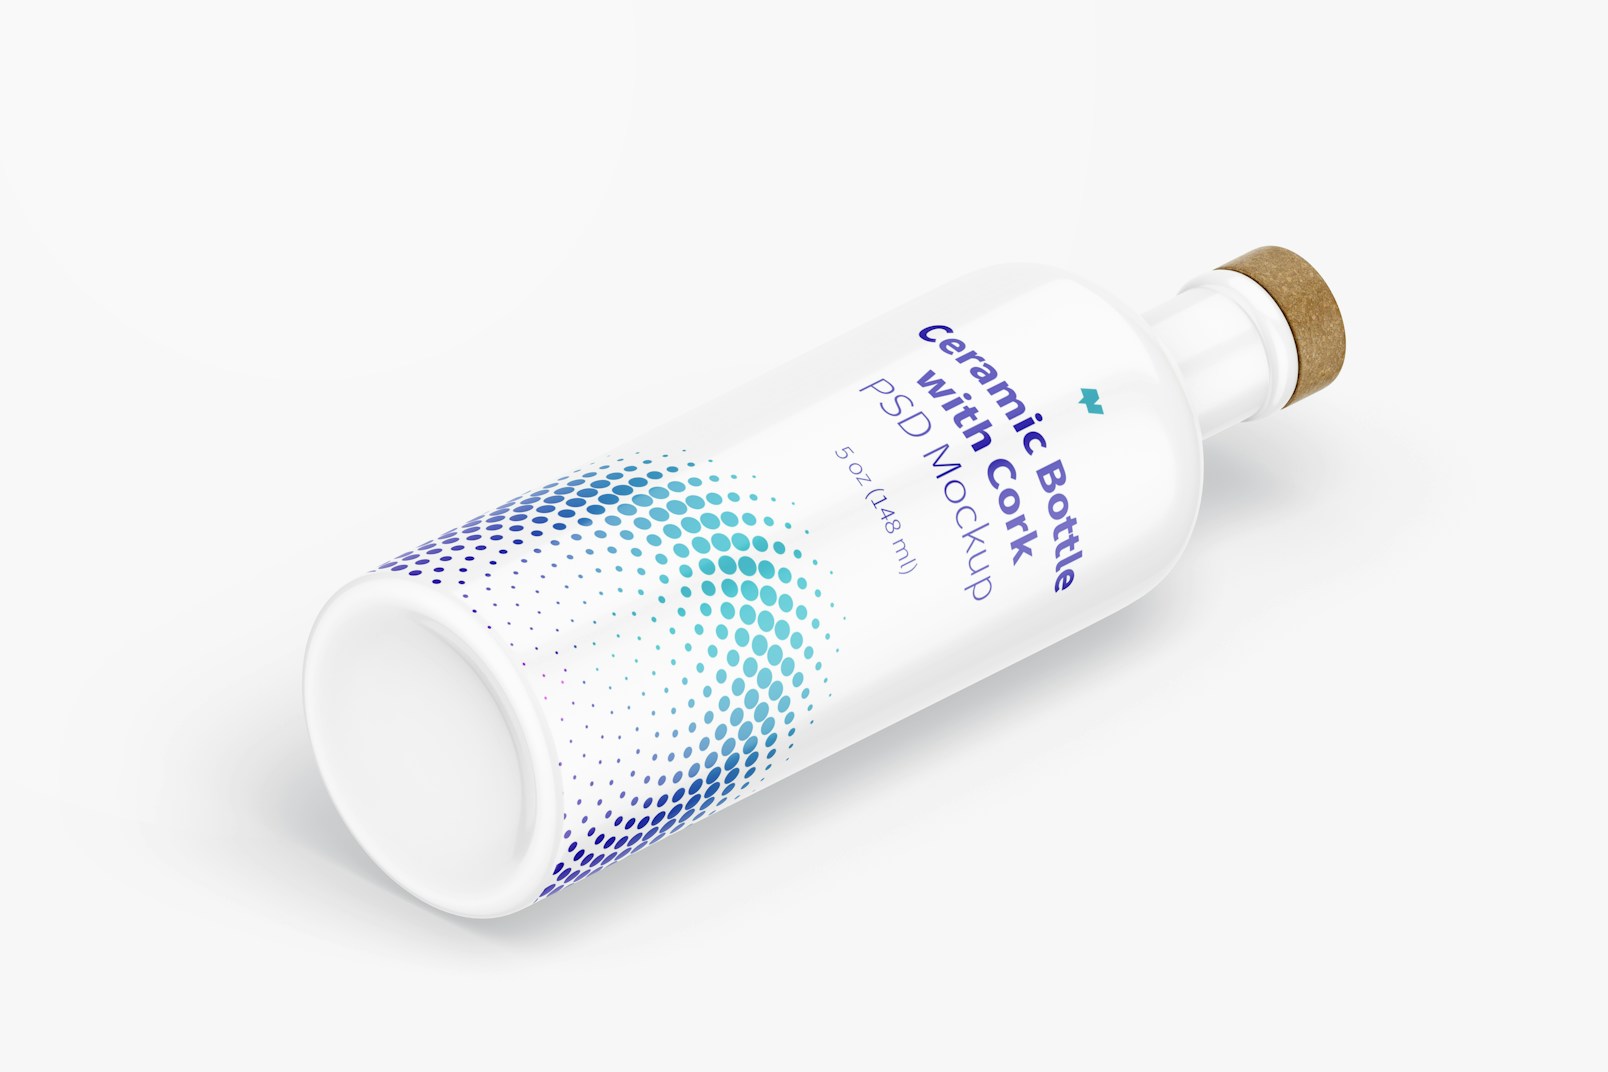 Ceramic Bottle with Cork Mockup, Isometric Right View